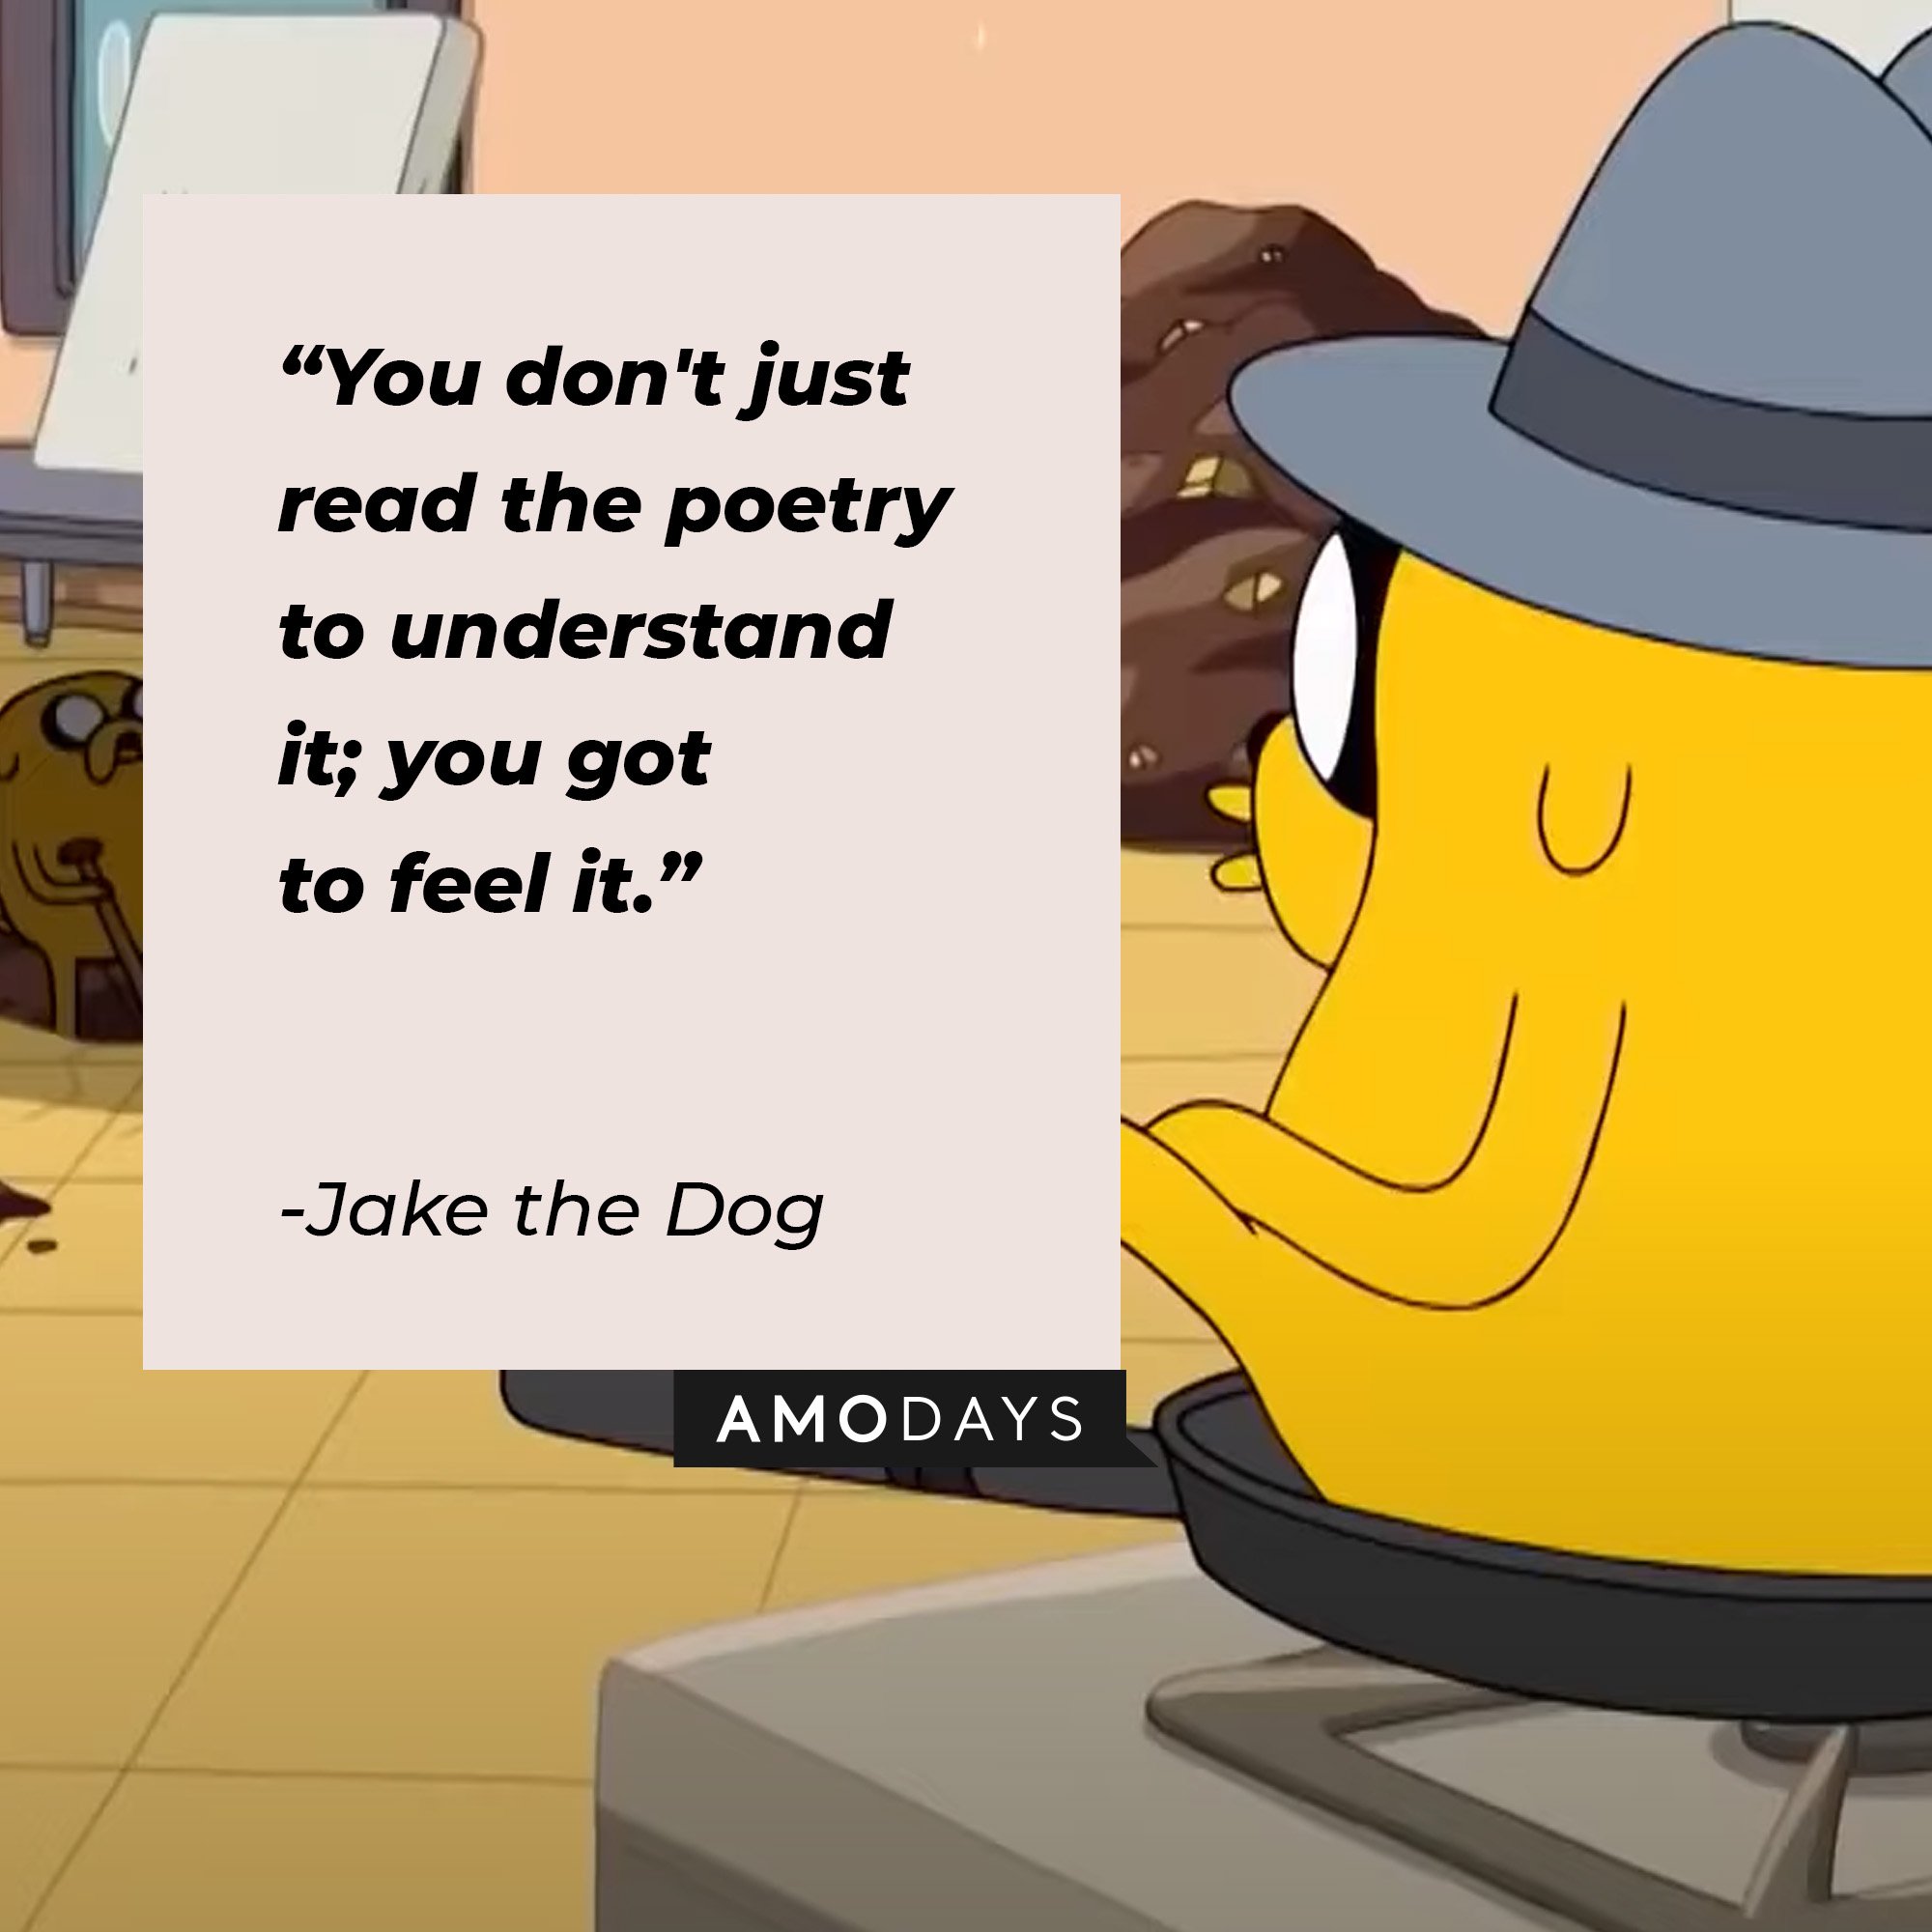 Jake the Dog’s quote: "You don't just read the poetry to understand it; you got to feel it."  | Image: AmoDays